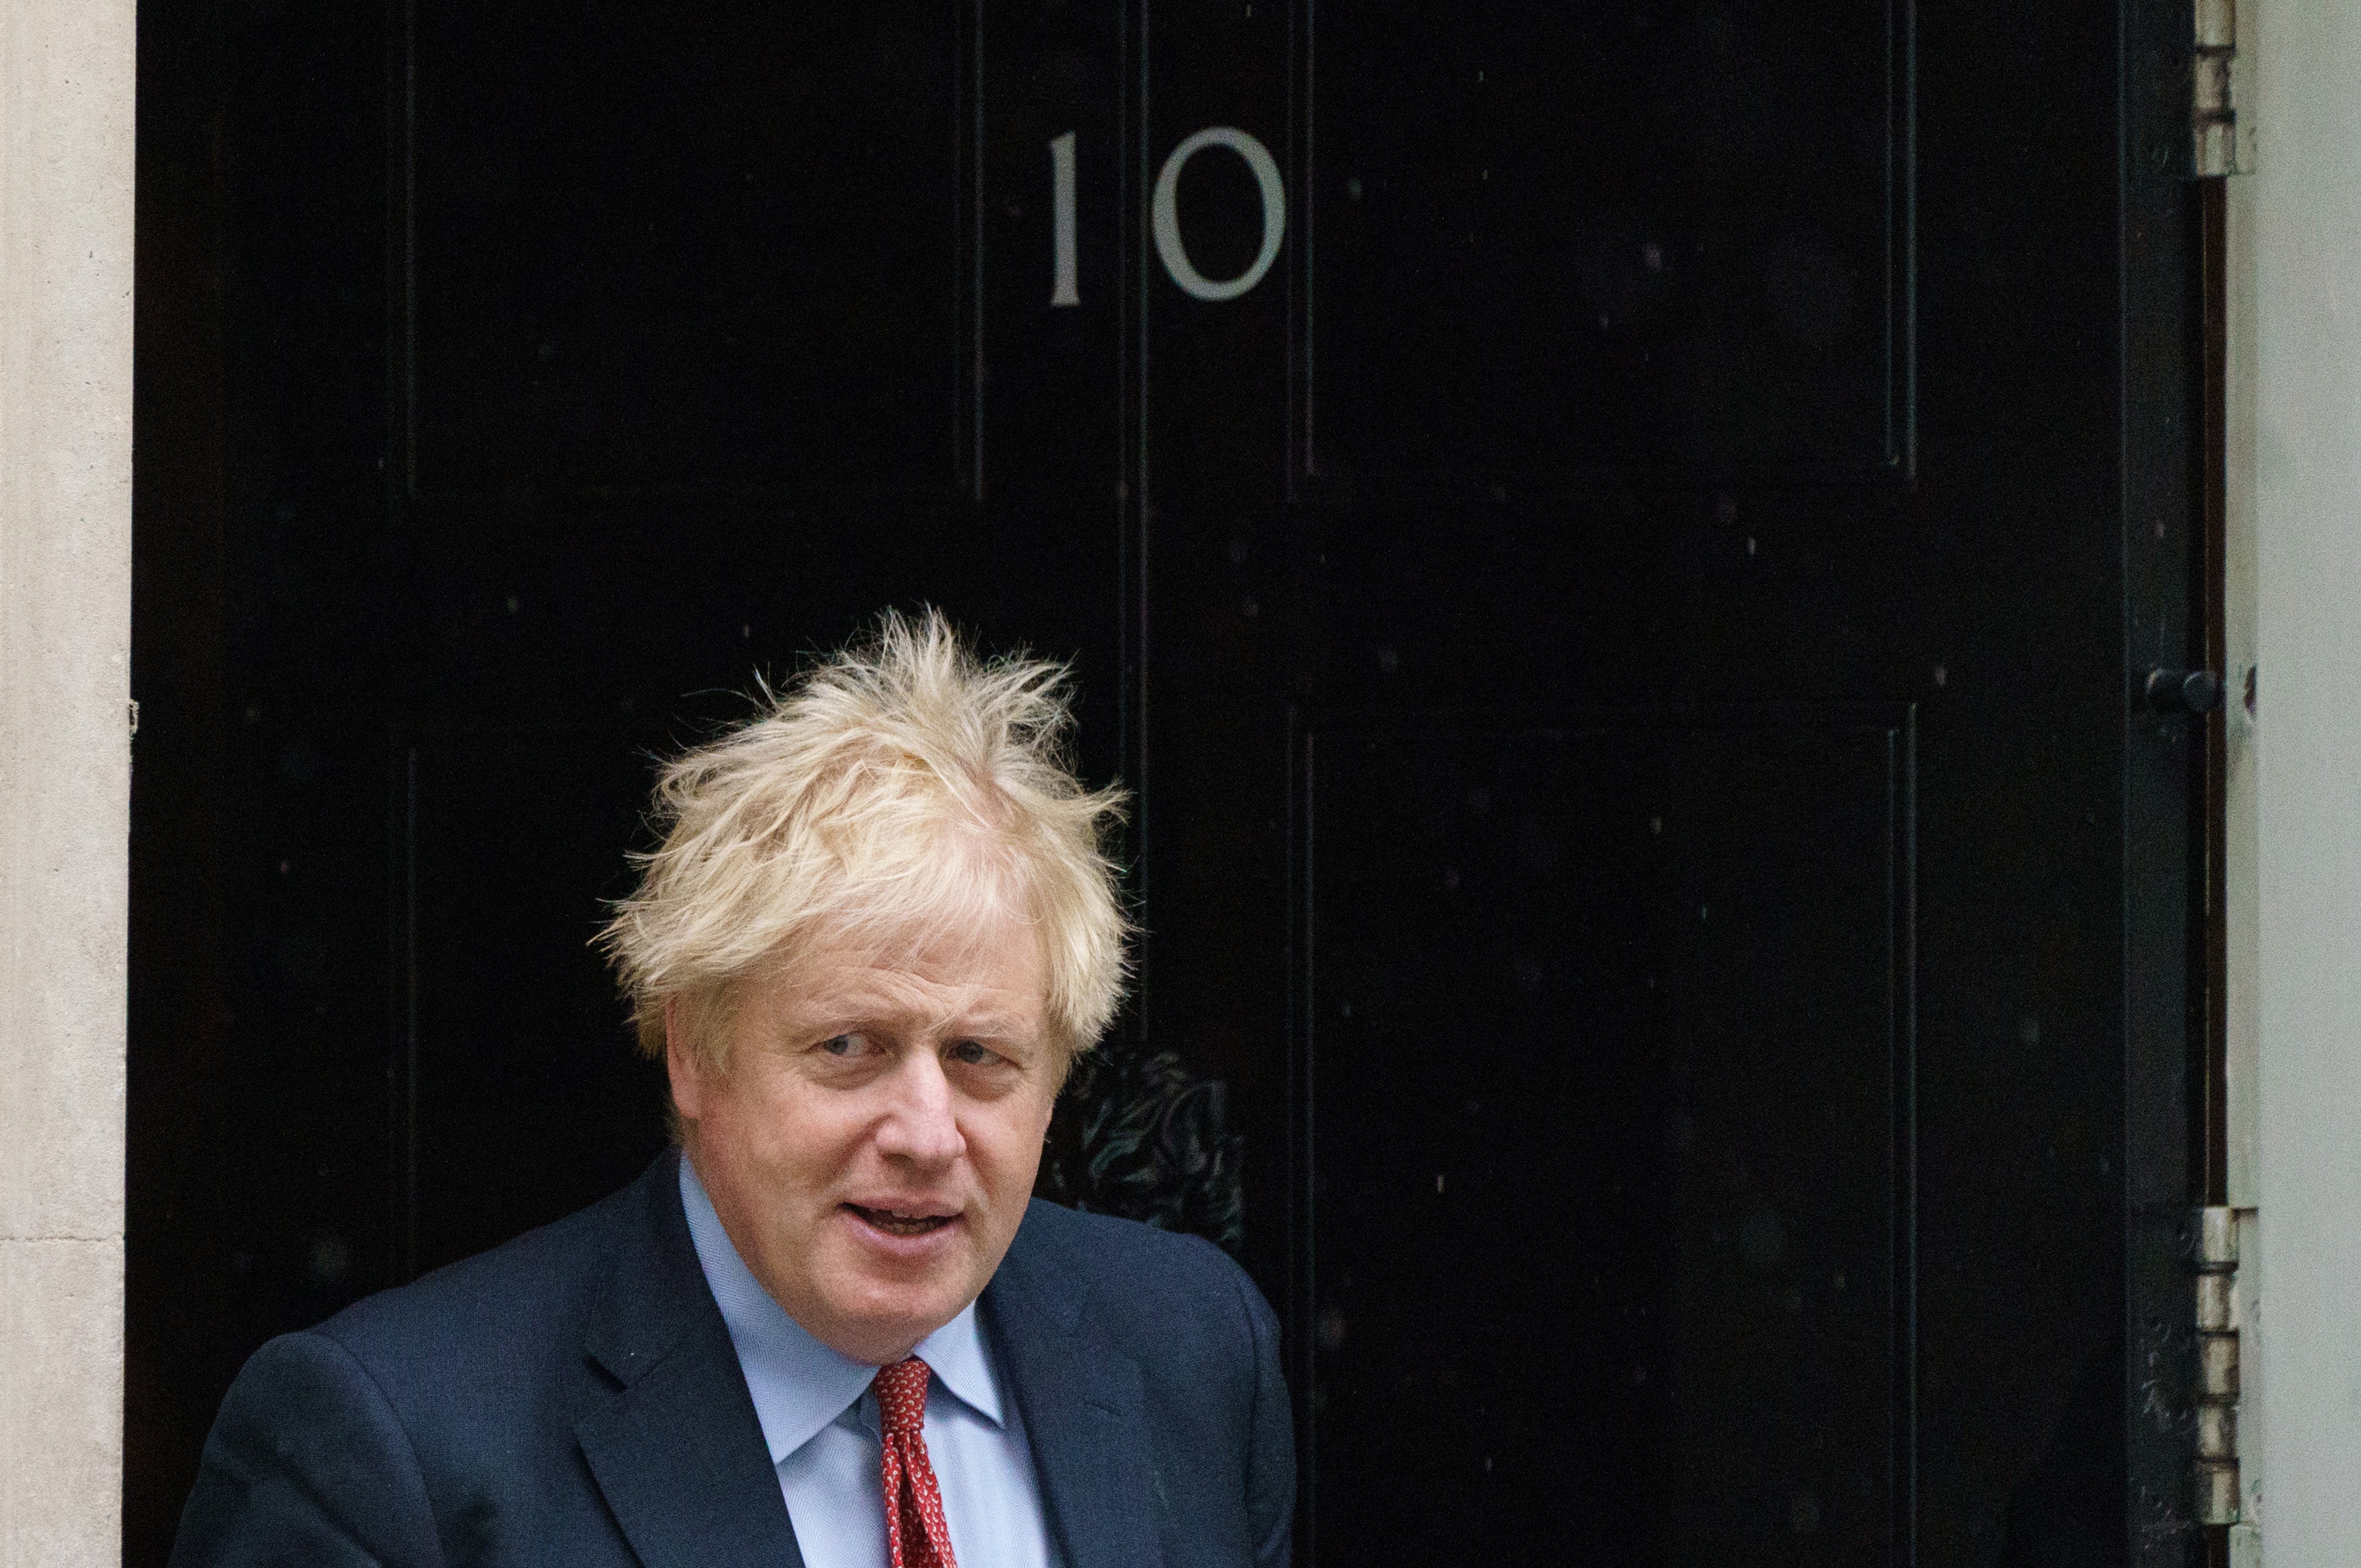 Boris Johnson is facing fresh accusations he lied to Parliament after photographs emerged of him raising a glass at a No 10 leaving party during lockdown (Dominic Lipinski/PA)